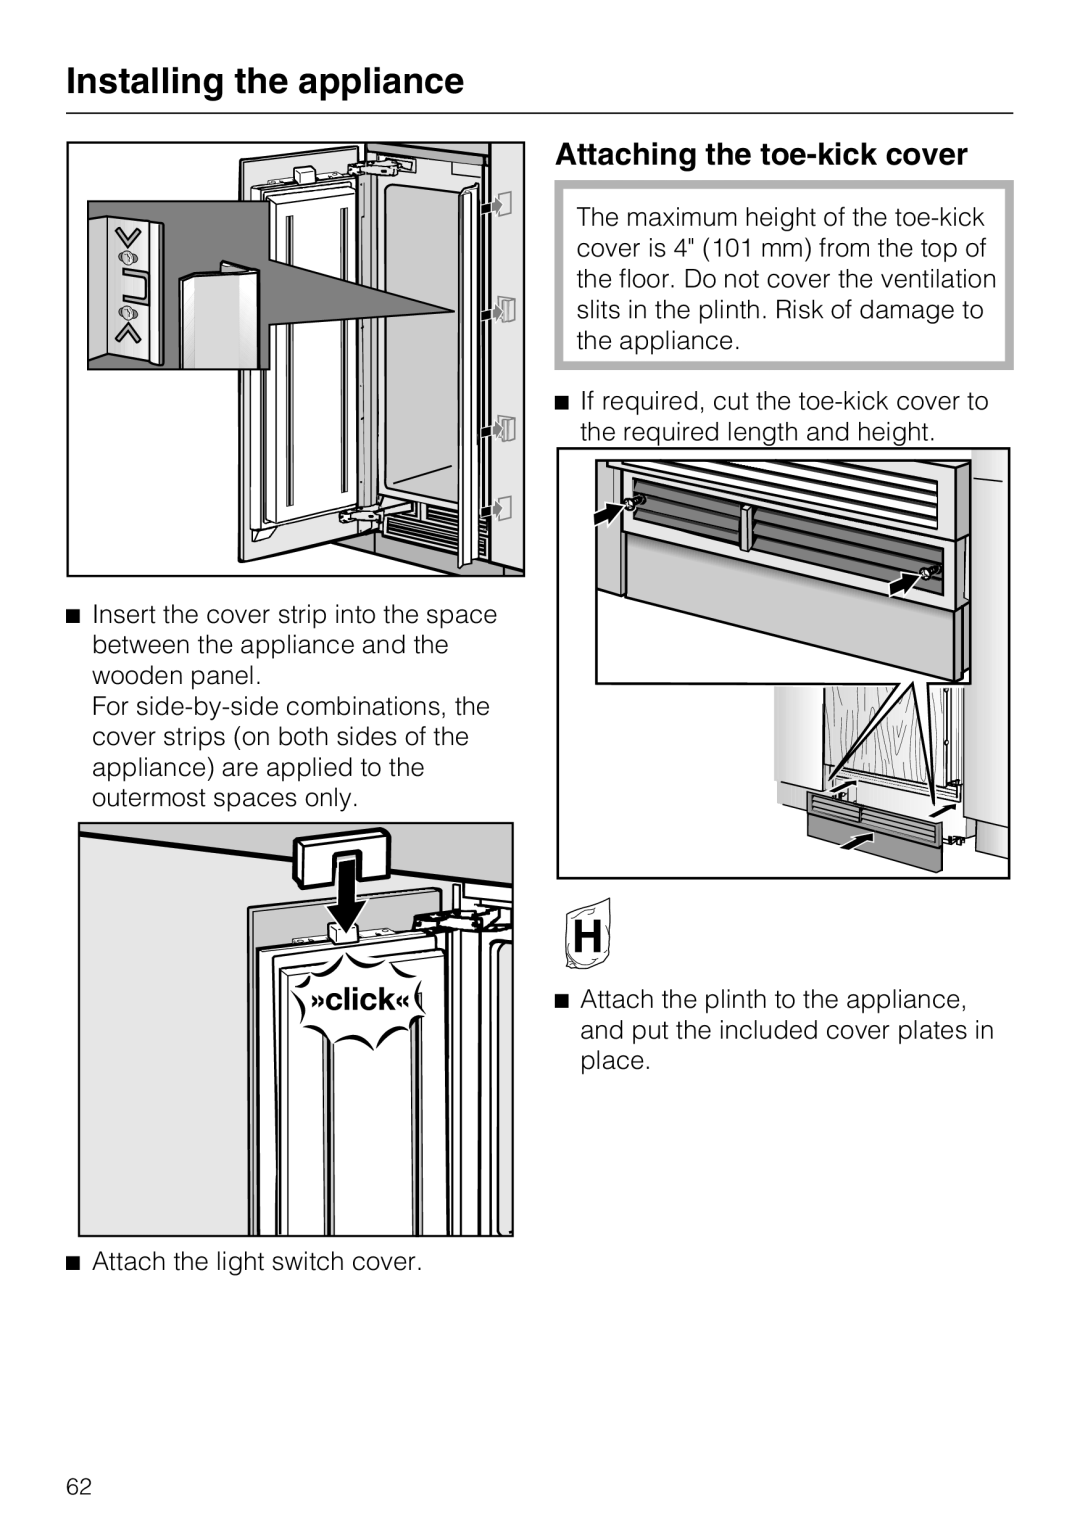 Miele 09 920 570 installation instructions Attaching the toe-kickcover, Installing the appliance 